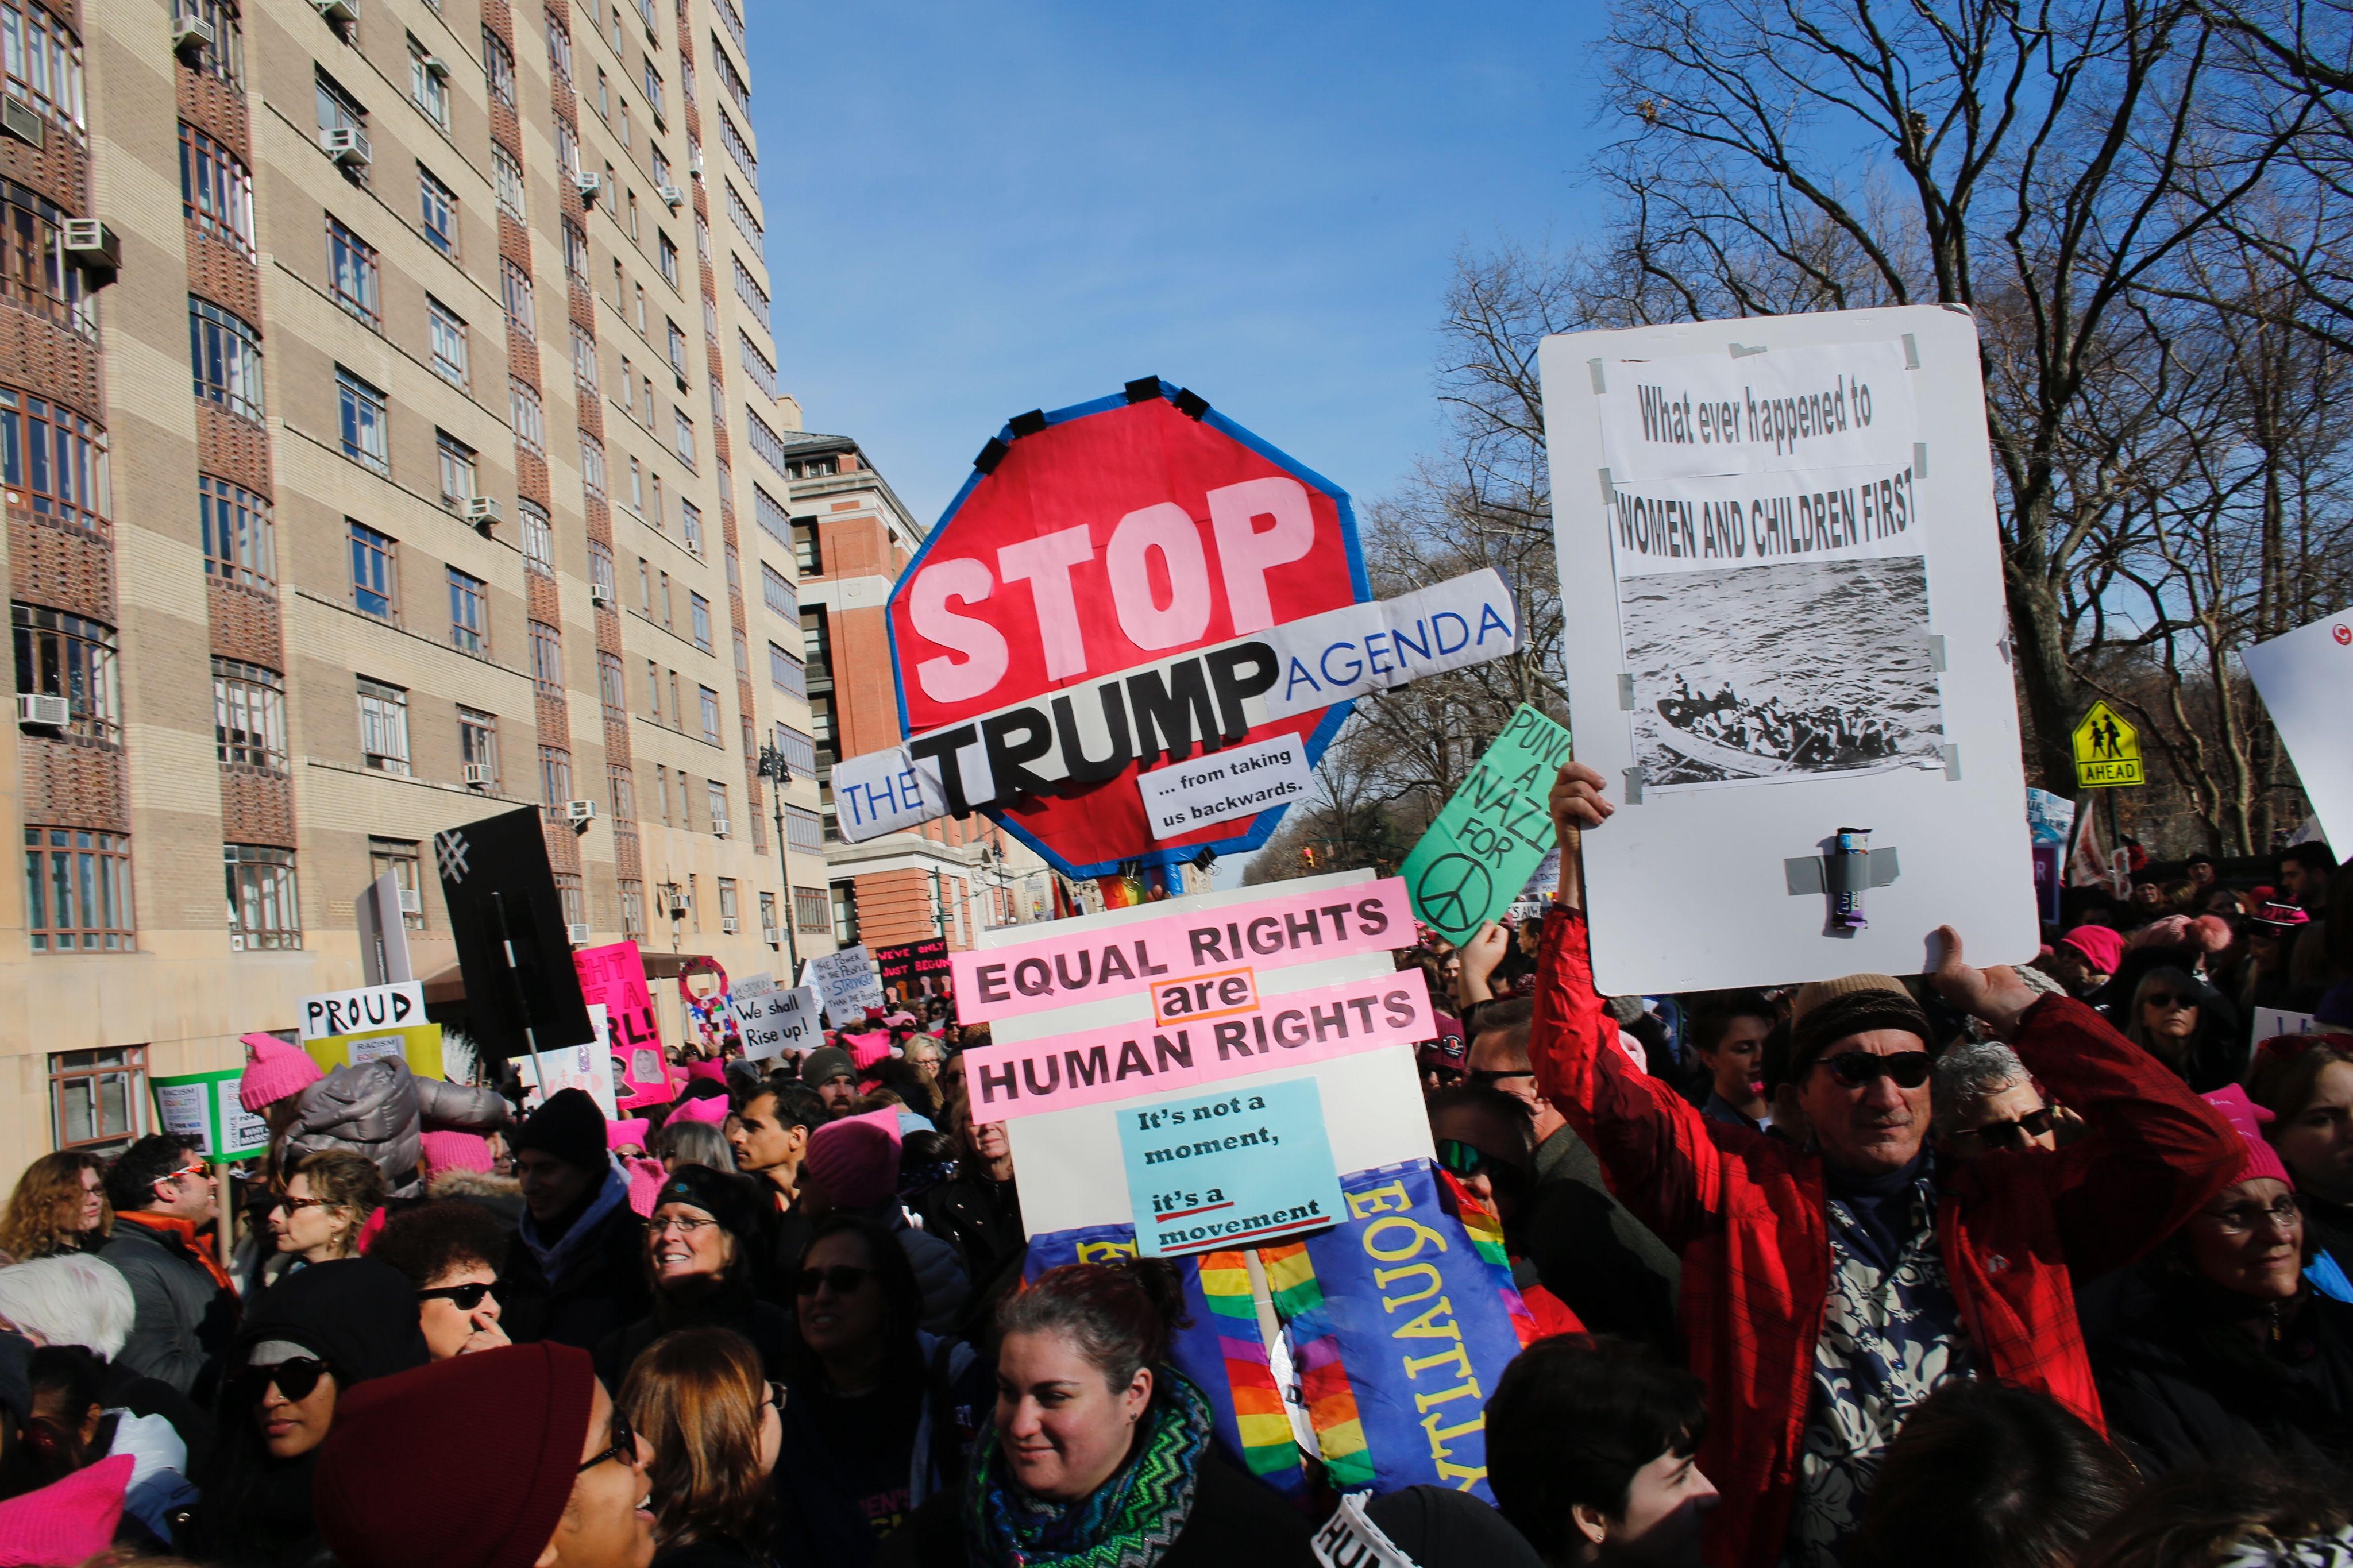 Women’s March NYC Crowd Size: How Many Attended? [PHOTOS] | Heavy.com